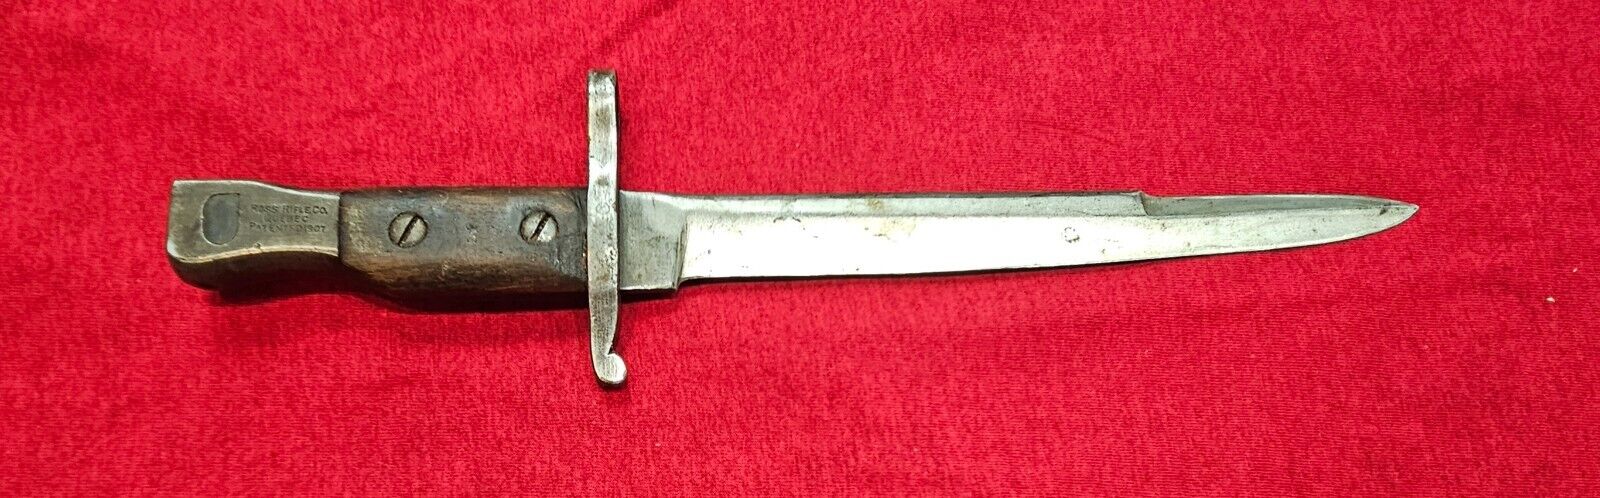 ROSS RIFLE CO.  Quebec 1907 CANADIAN WW1 British Army BAYONET ROSS GOOD 01/16